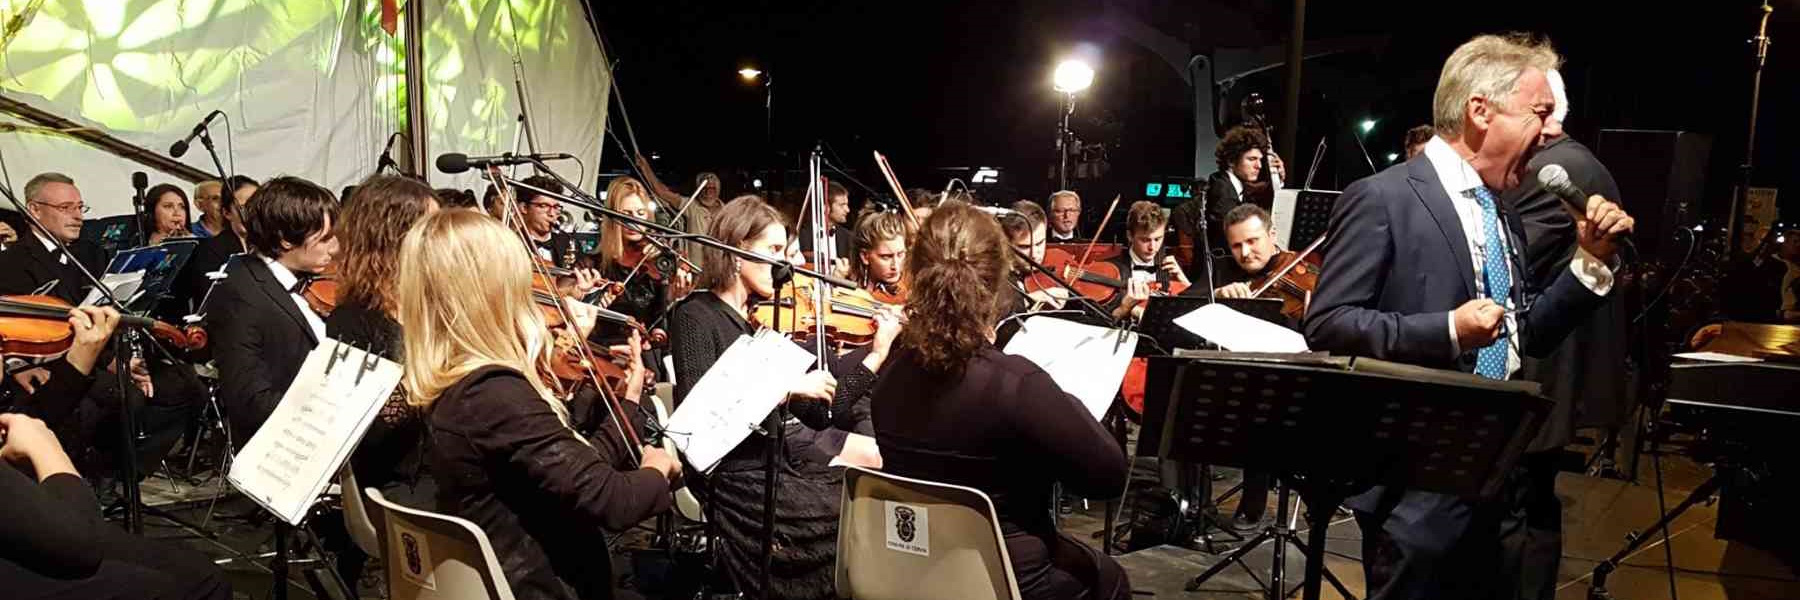 Summer concerts of the Great City Orchestra  of Cervia